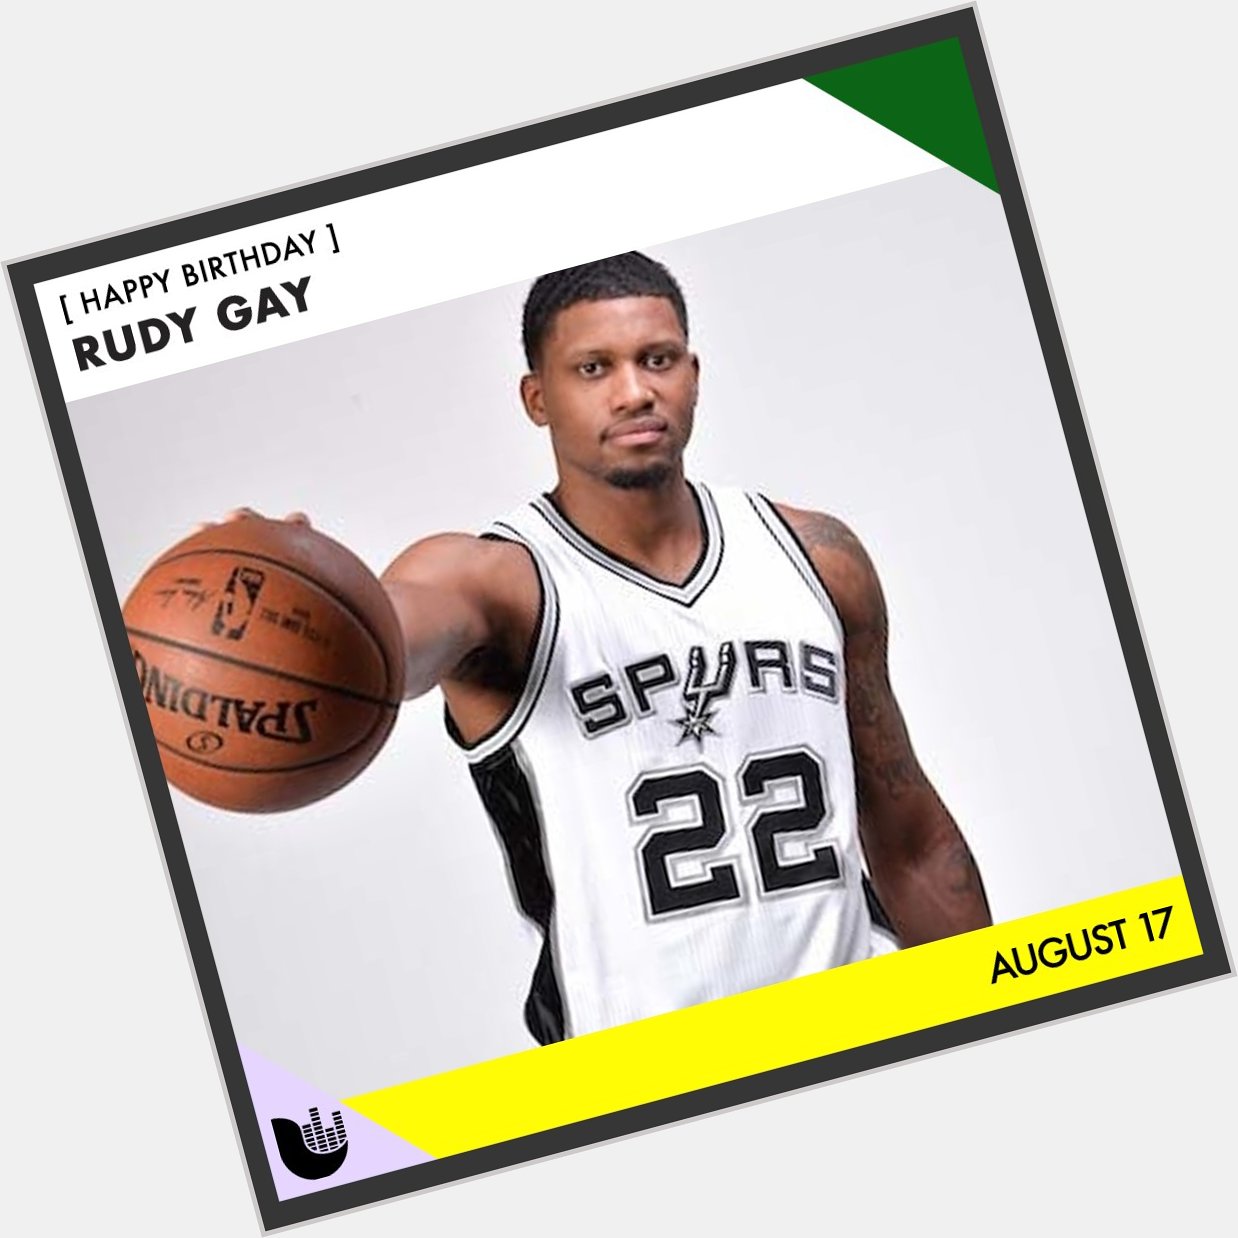 Big shoutout to San Antonio Spurs Rudy Gay and to all those celebrating their happy birthday today! 